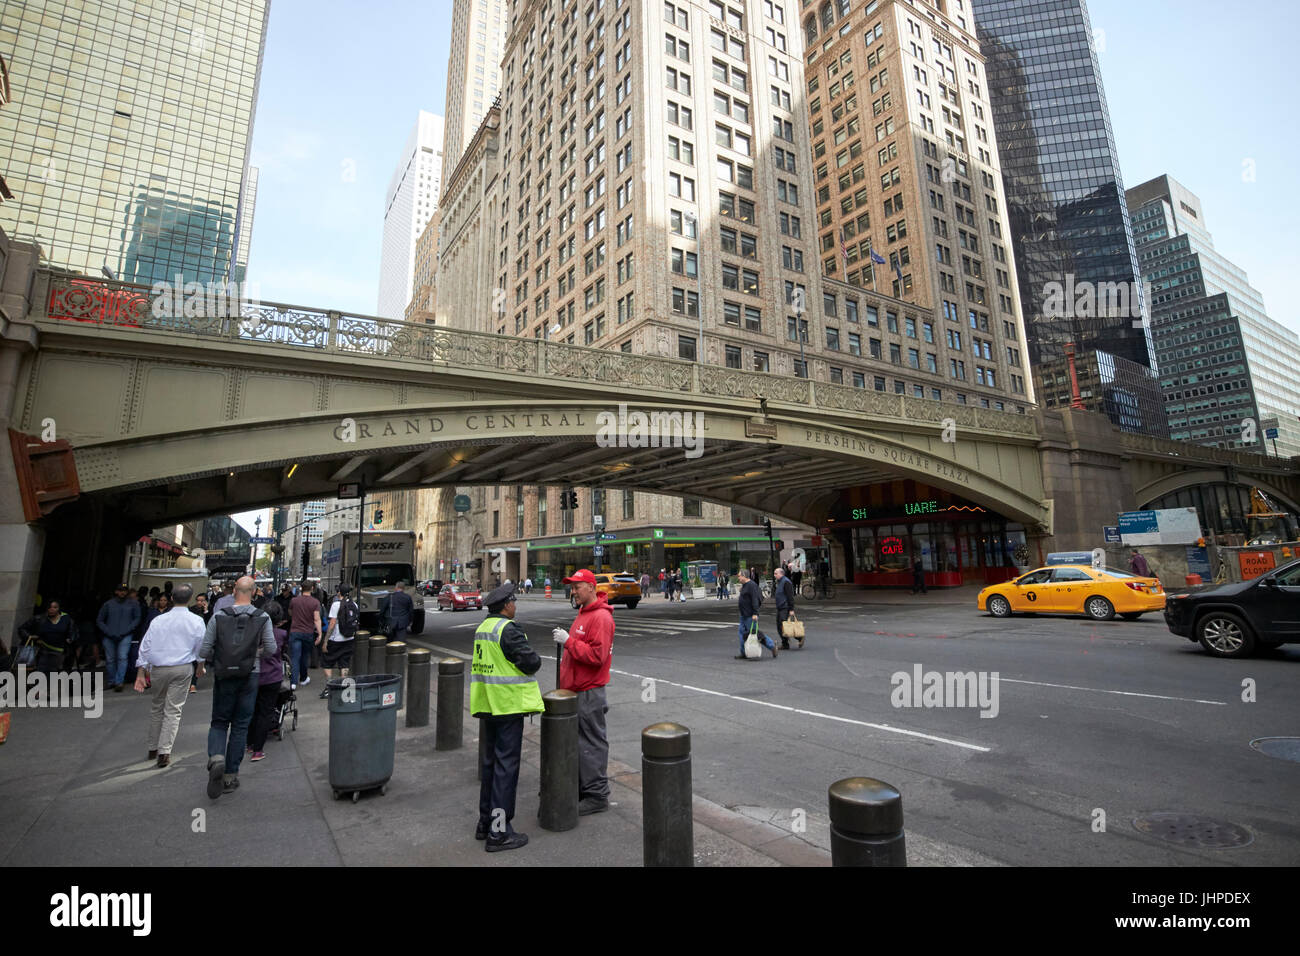 viaduct over pershing square linking grand central station and park avenue New York City USA Stock Photo